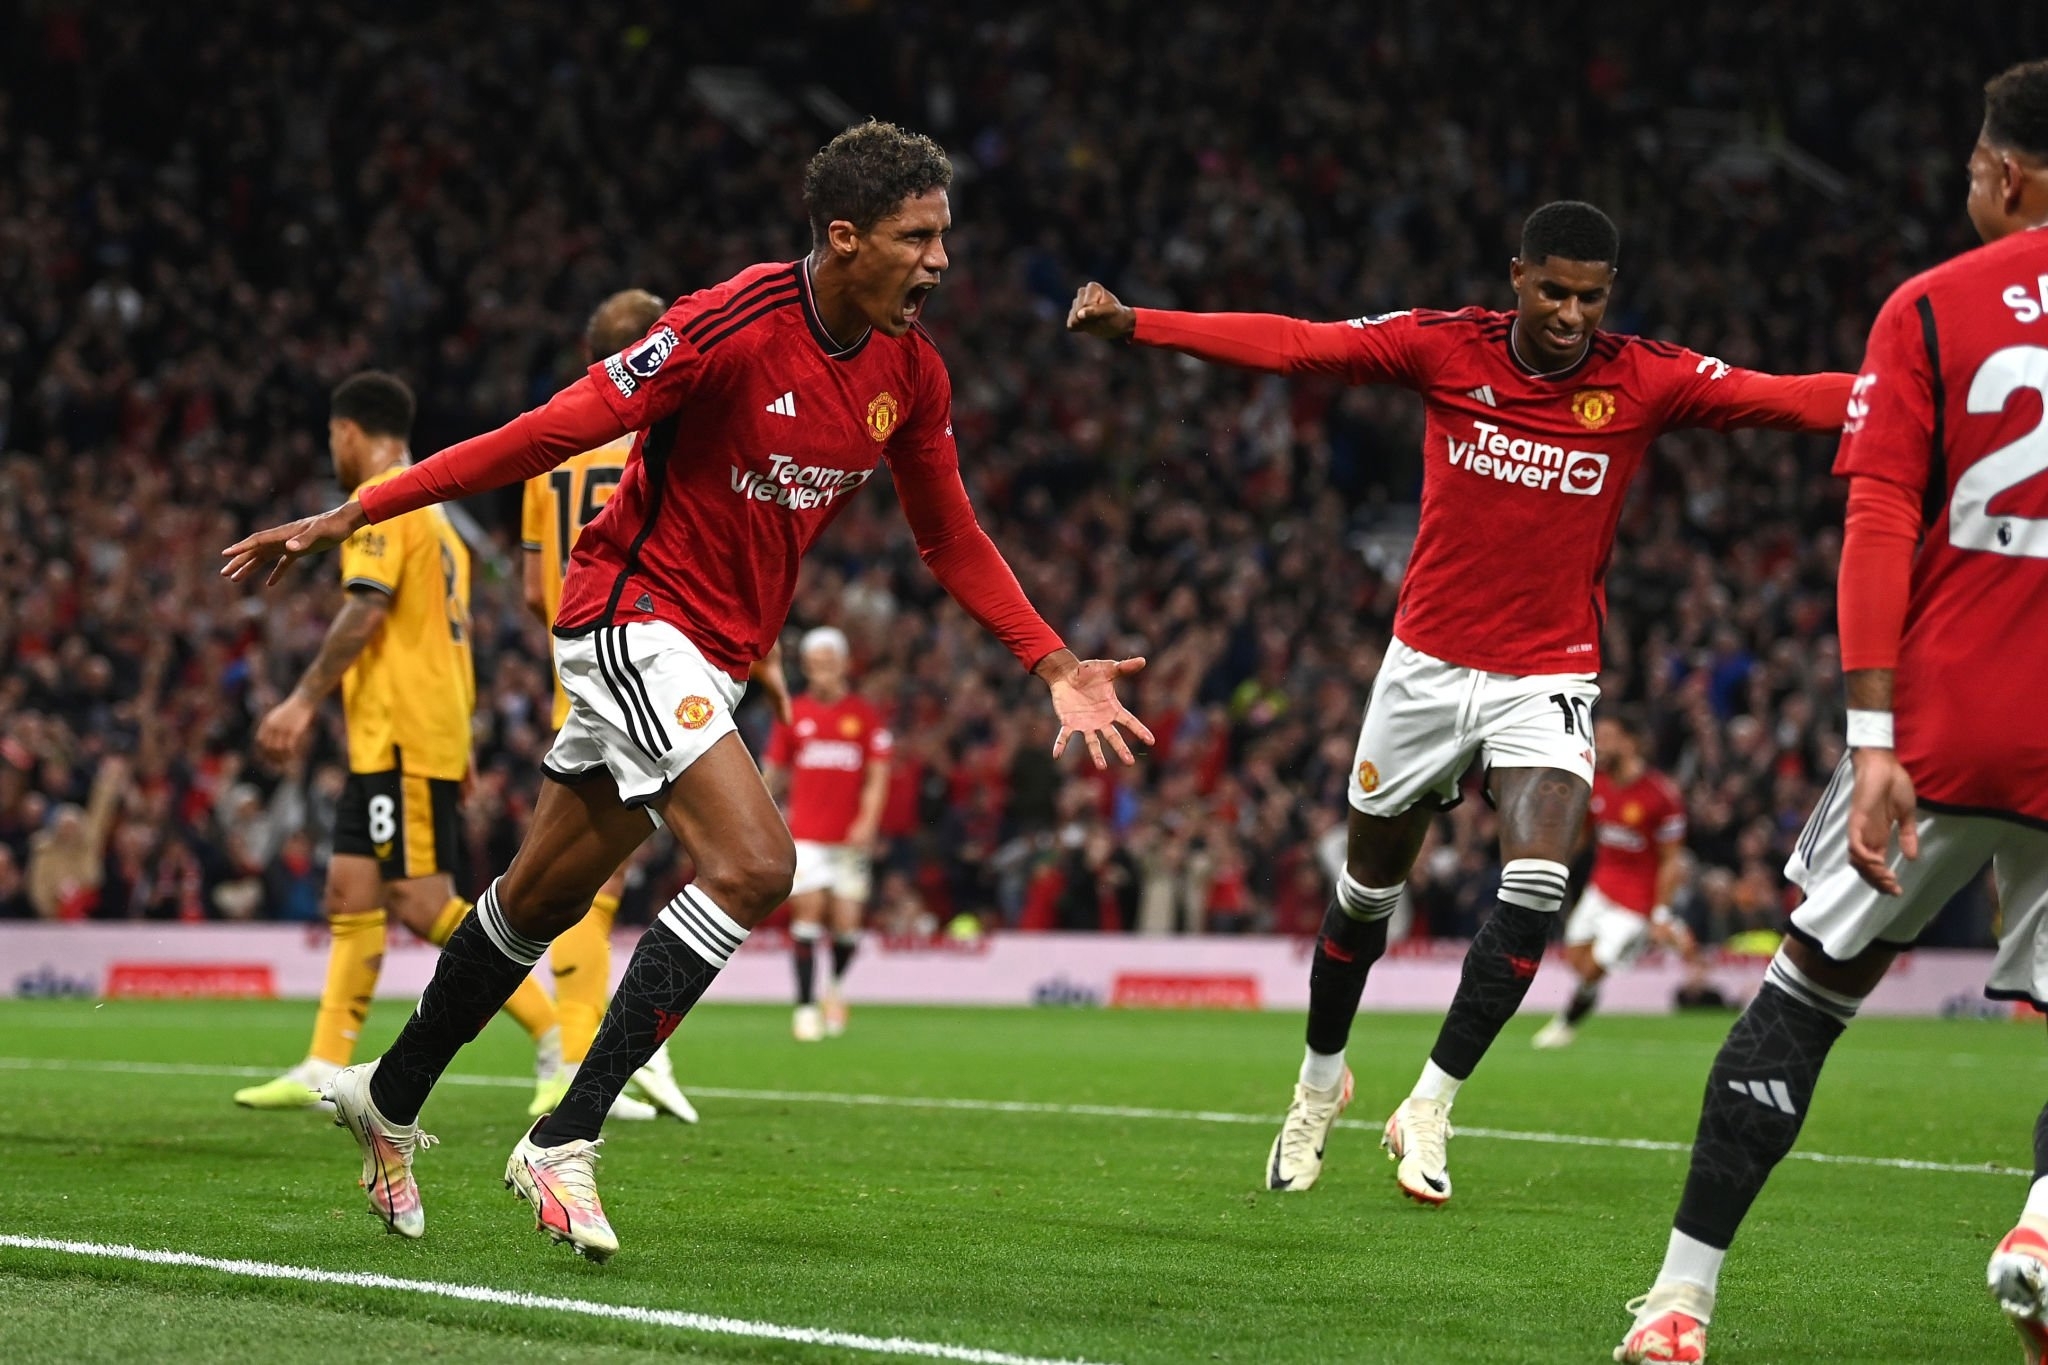 Man United vs Nottingham Forest - MUN vs NFO - Manchester United are looking to go back to winning ways in their third Premier League match